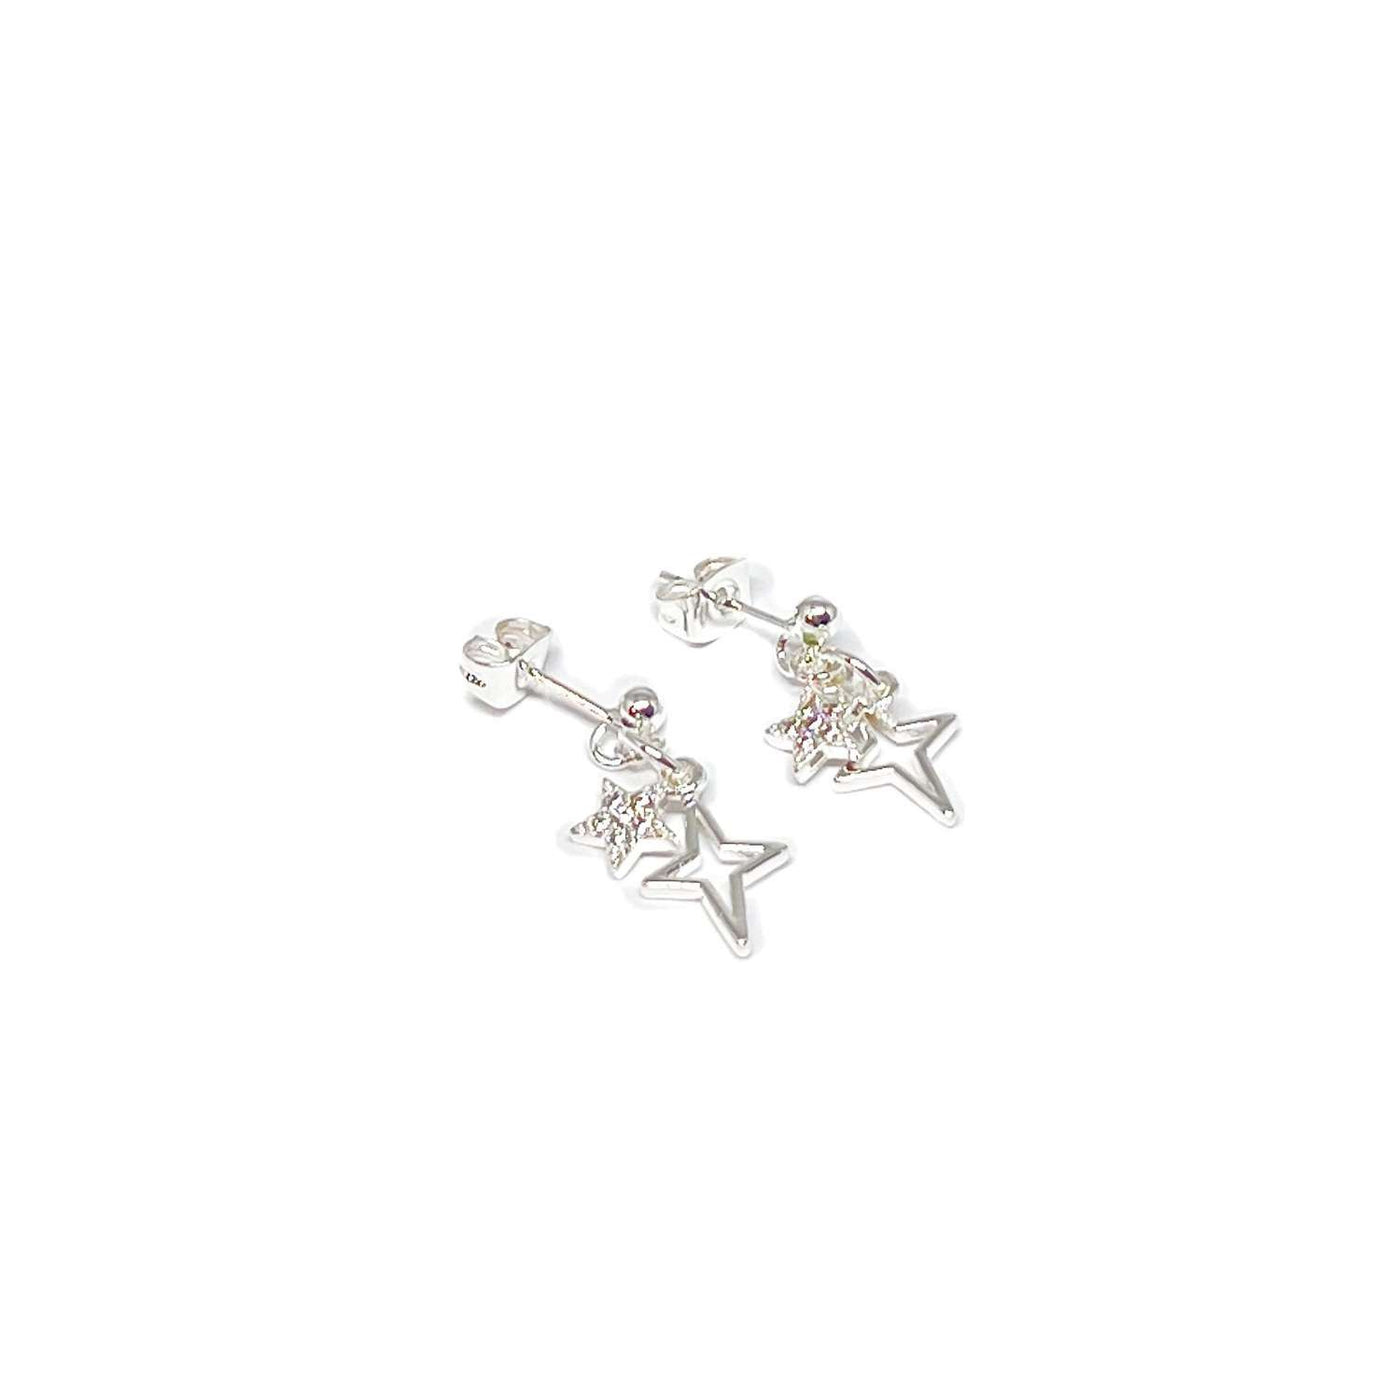 Astra Star Earrings - Silver - Clementine Jewellery